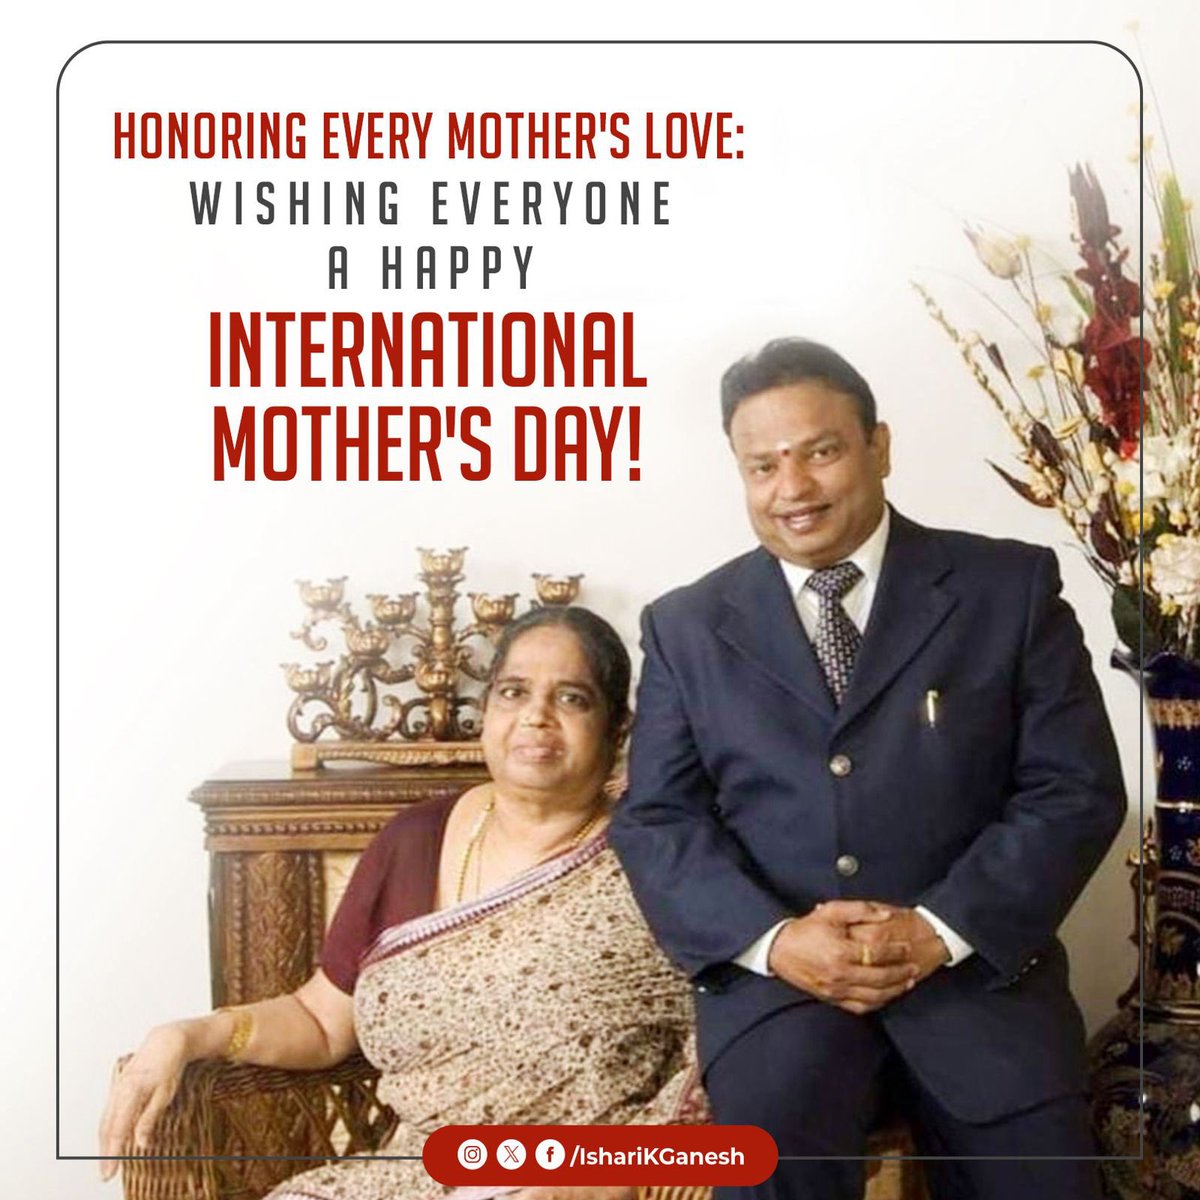 On this International Mother's Day, I wish to extend my heartfelt wishes to all, while fondly remembering my beloved mother, Tmt. Pushpa Isari Velan. She was a pillar in my life and a motivation in my path! Let's cherish and celebrate the endless love and sacrifices of mothers